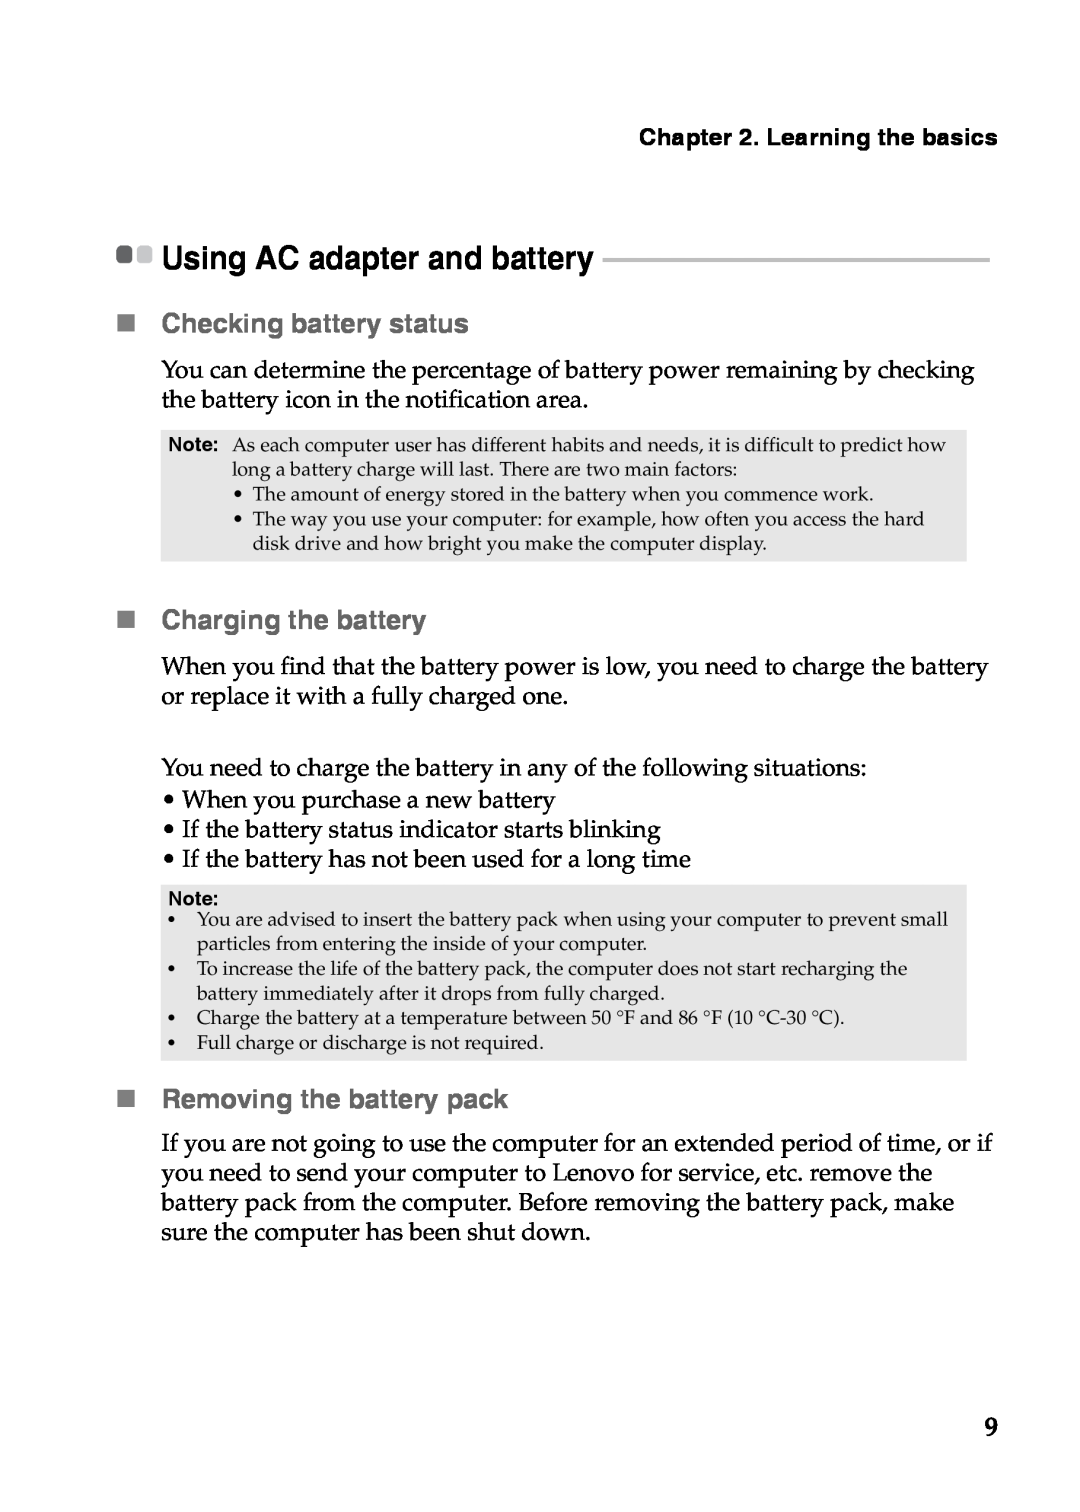 Lenovo S110 „Checking battery status, „Charging the battery, „Removing the battery pack, Using AC adapter and battery 